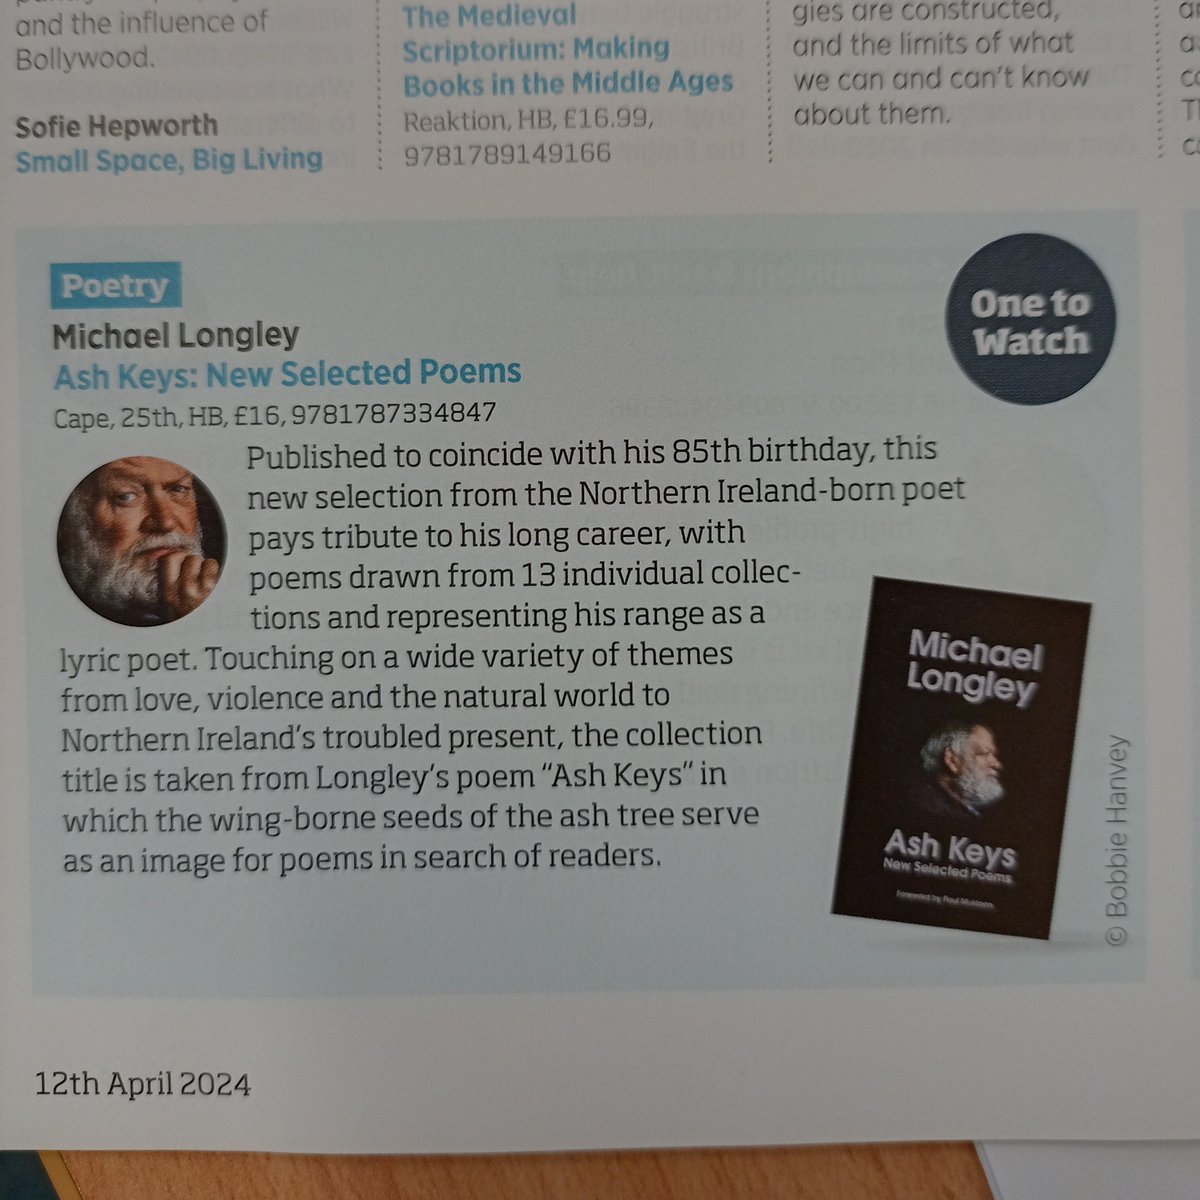 Congratulations to friend of the press and frequent Irish Pages contributor, Michael Longley, on the arrival of his New Selected Poems (published by @JonathanCape on the occasion of his 85th birthday) 🌳 Info below from @thebookseller 📚 penguin.co.uk/books/458846/a… @IrishLitTimes